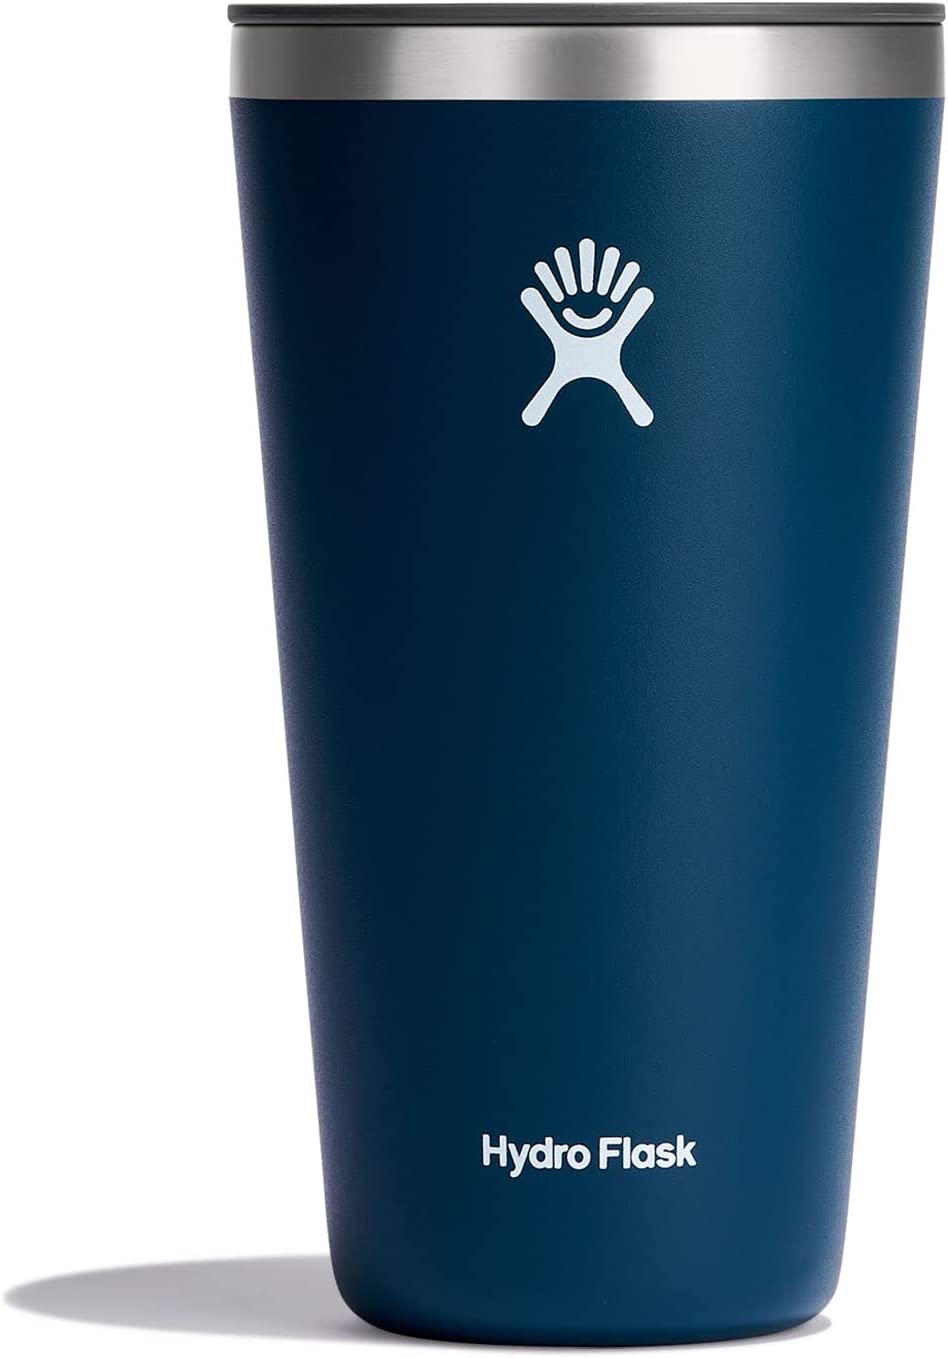 Hydro Flask All Around Tumbler - Stainless Steel Reusable Insulated Travel  Drinking Cup Water Bottle with Lid